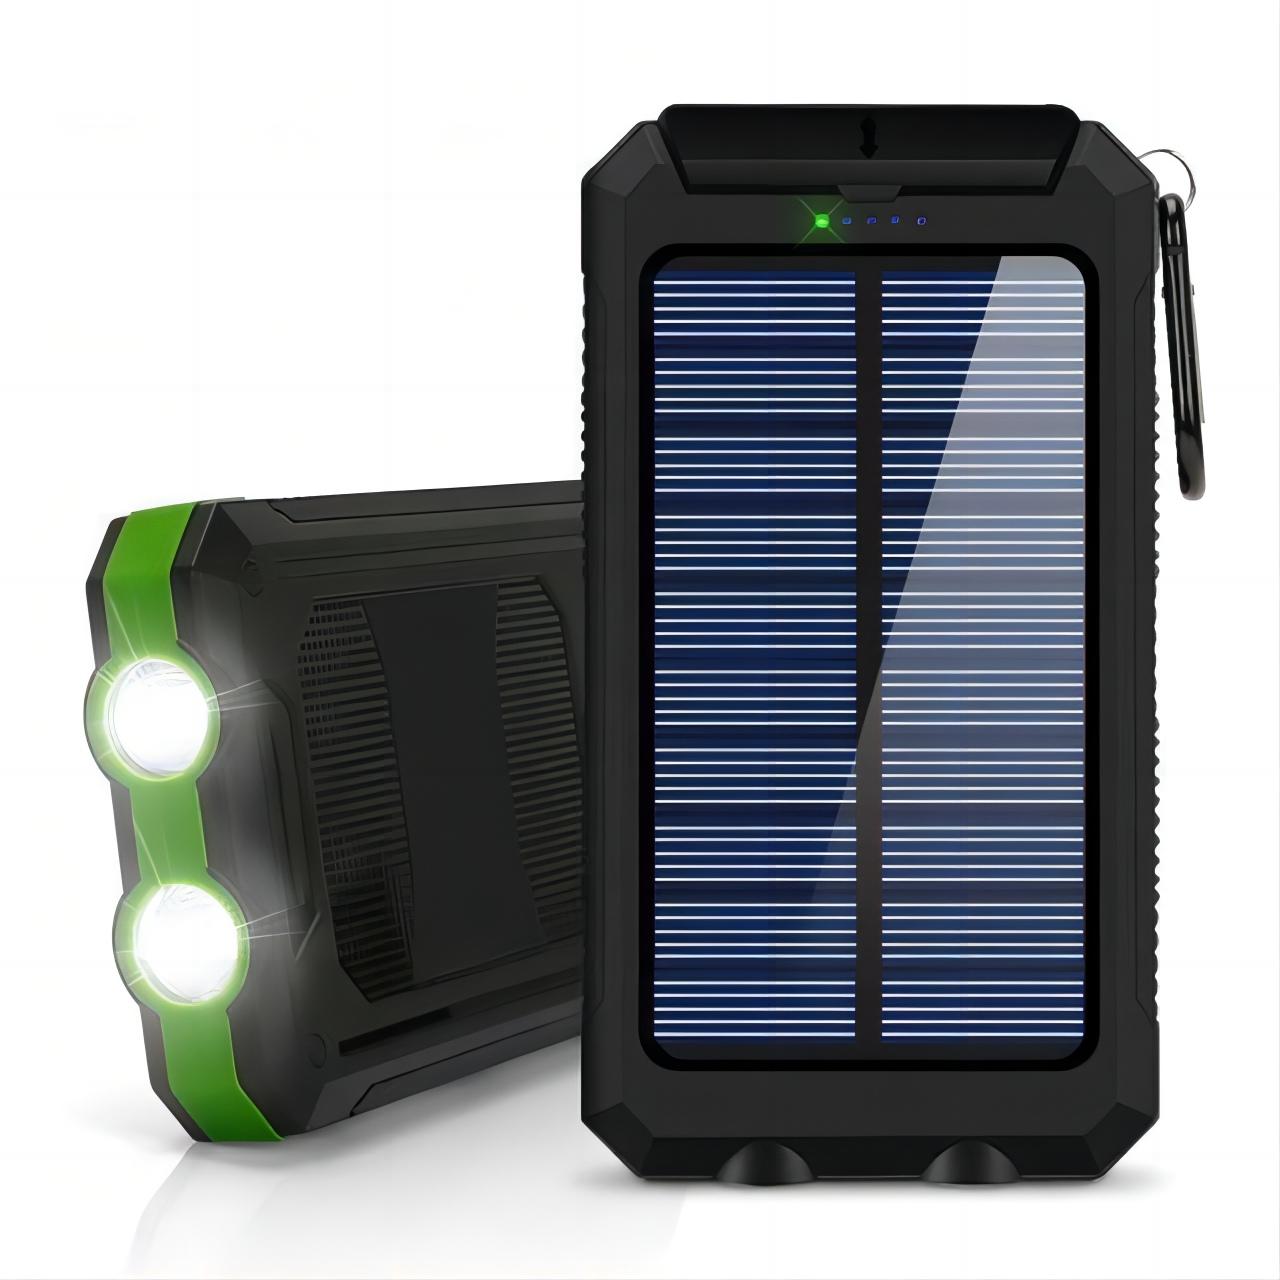 20000mah portable solar power bank 2 usb charging ports strong led light outdoor emergency use perfect gift for birthdays valentines easter more details 1